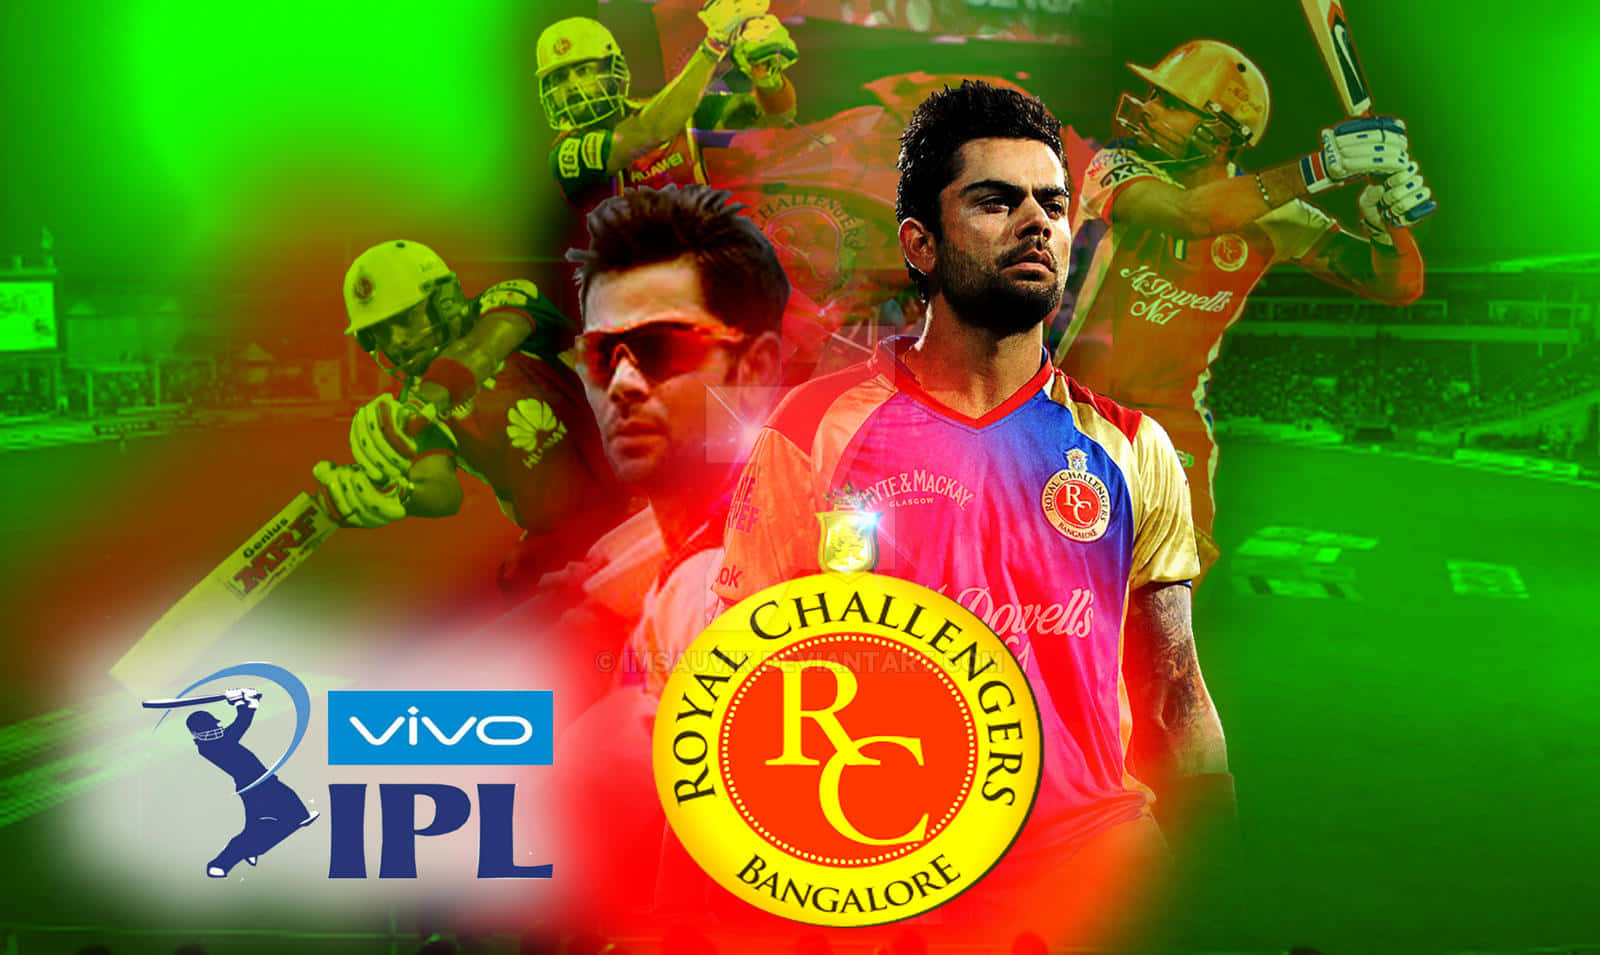 Support the Royal Challengers Bangalore!